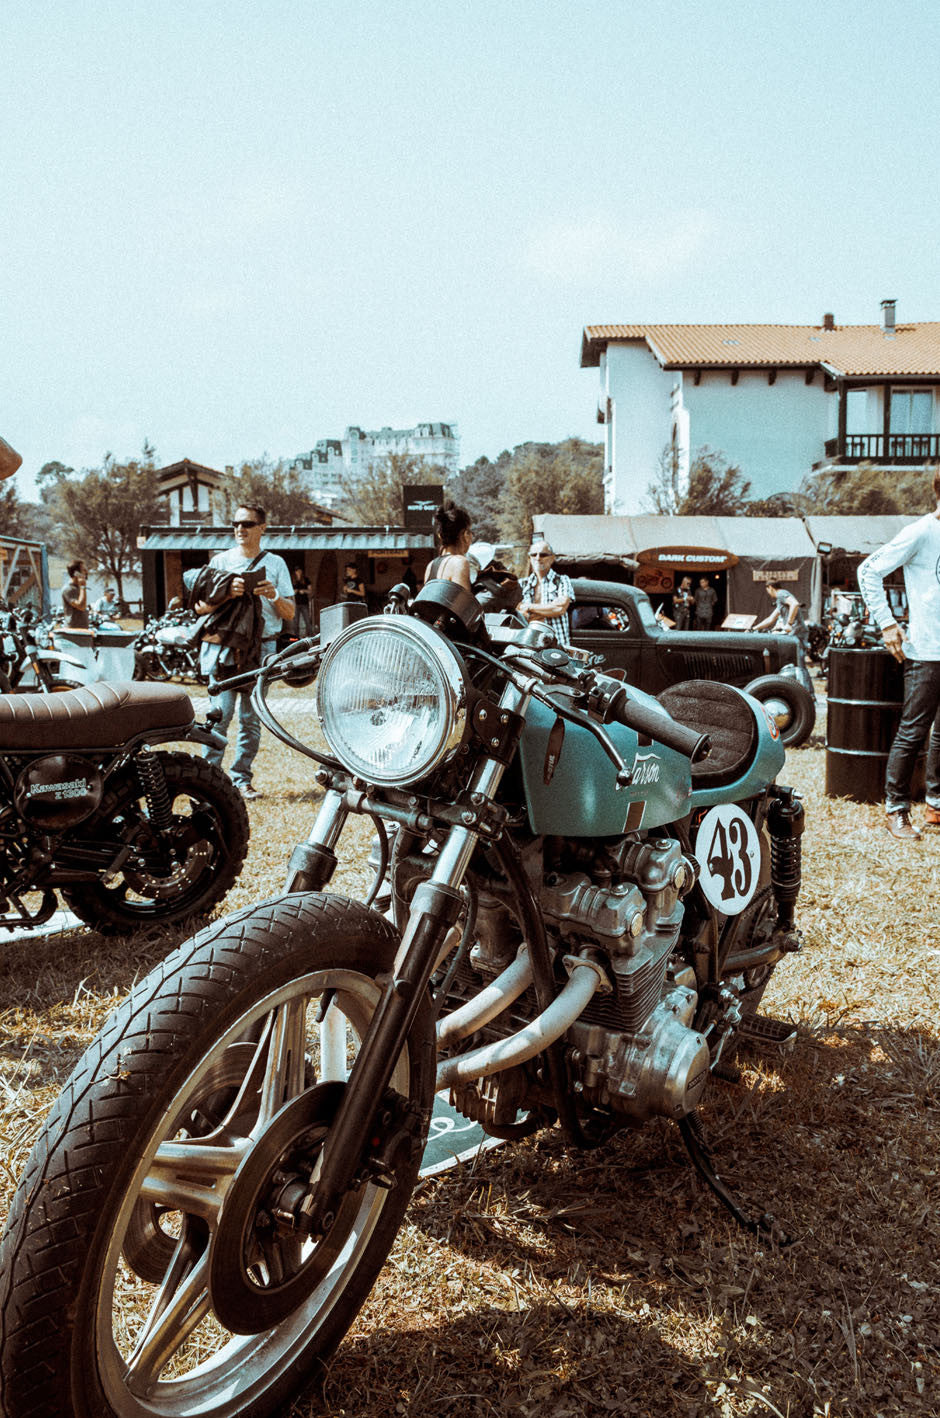 WHEELS & WAVES 2017 WNW 2017 WHEELS AND WAVES PANDCO P&CO BIARRITZ FRANCE MOTORCYCLE CAFE RACERS CUSTOM SURF